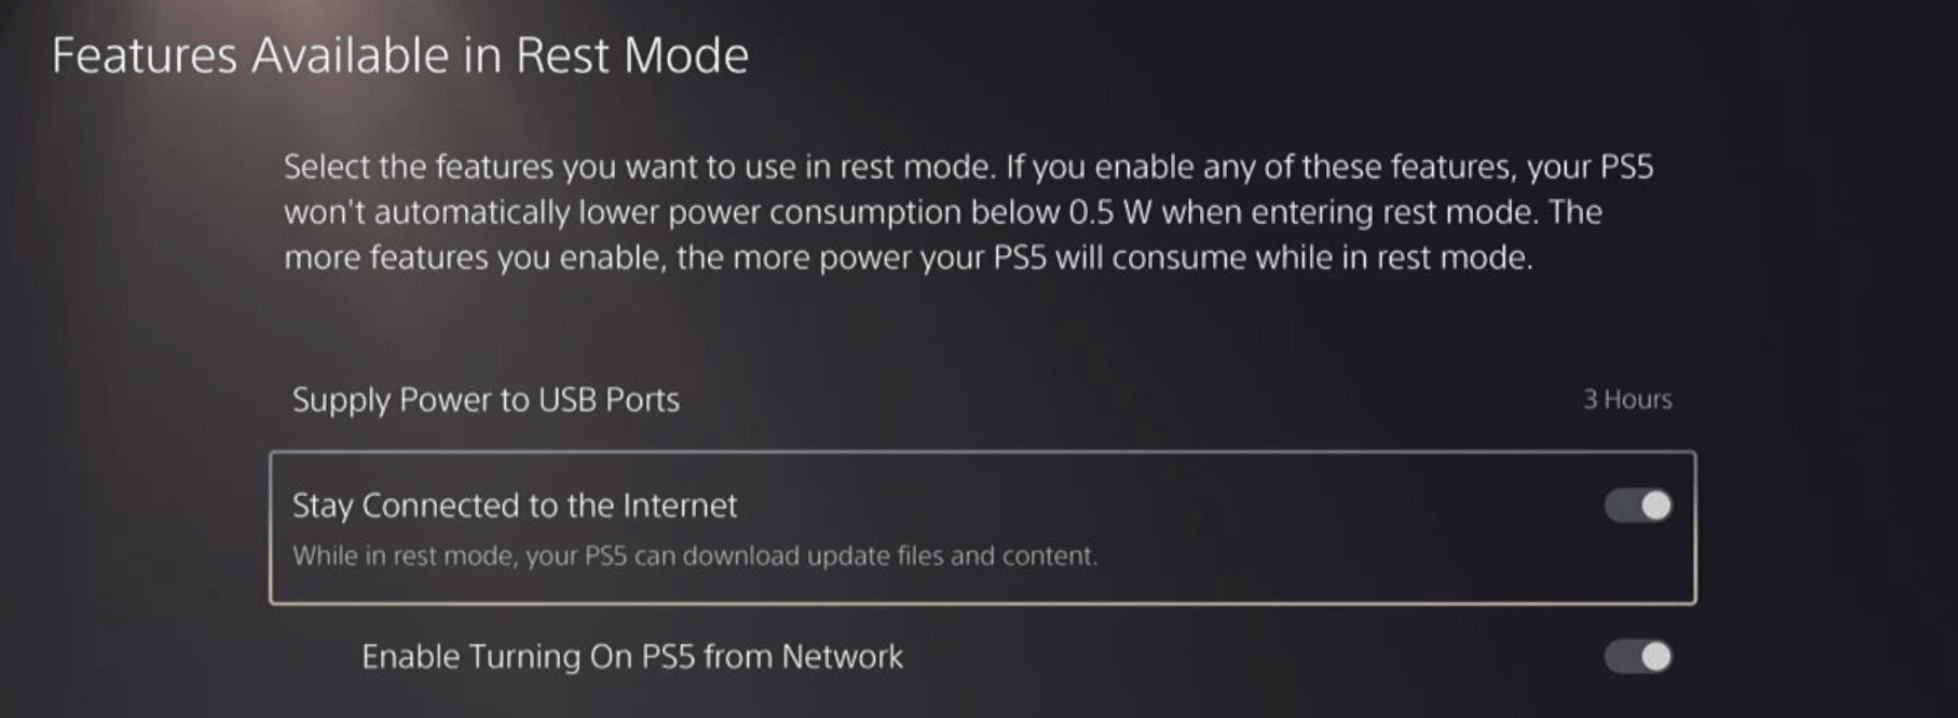 Stay Connected to the Internet is toggled in PS5 rest mode settings menu to enable automatic updates of Custom Mech Wars